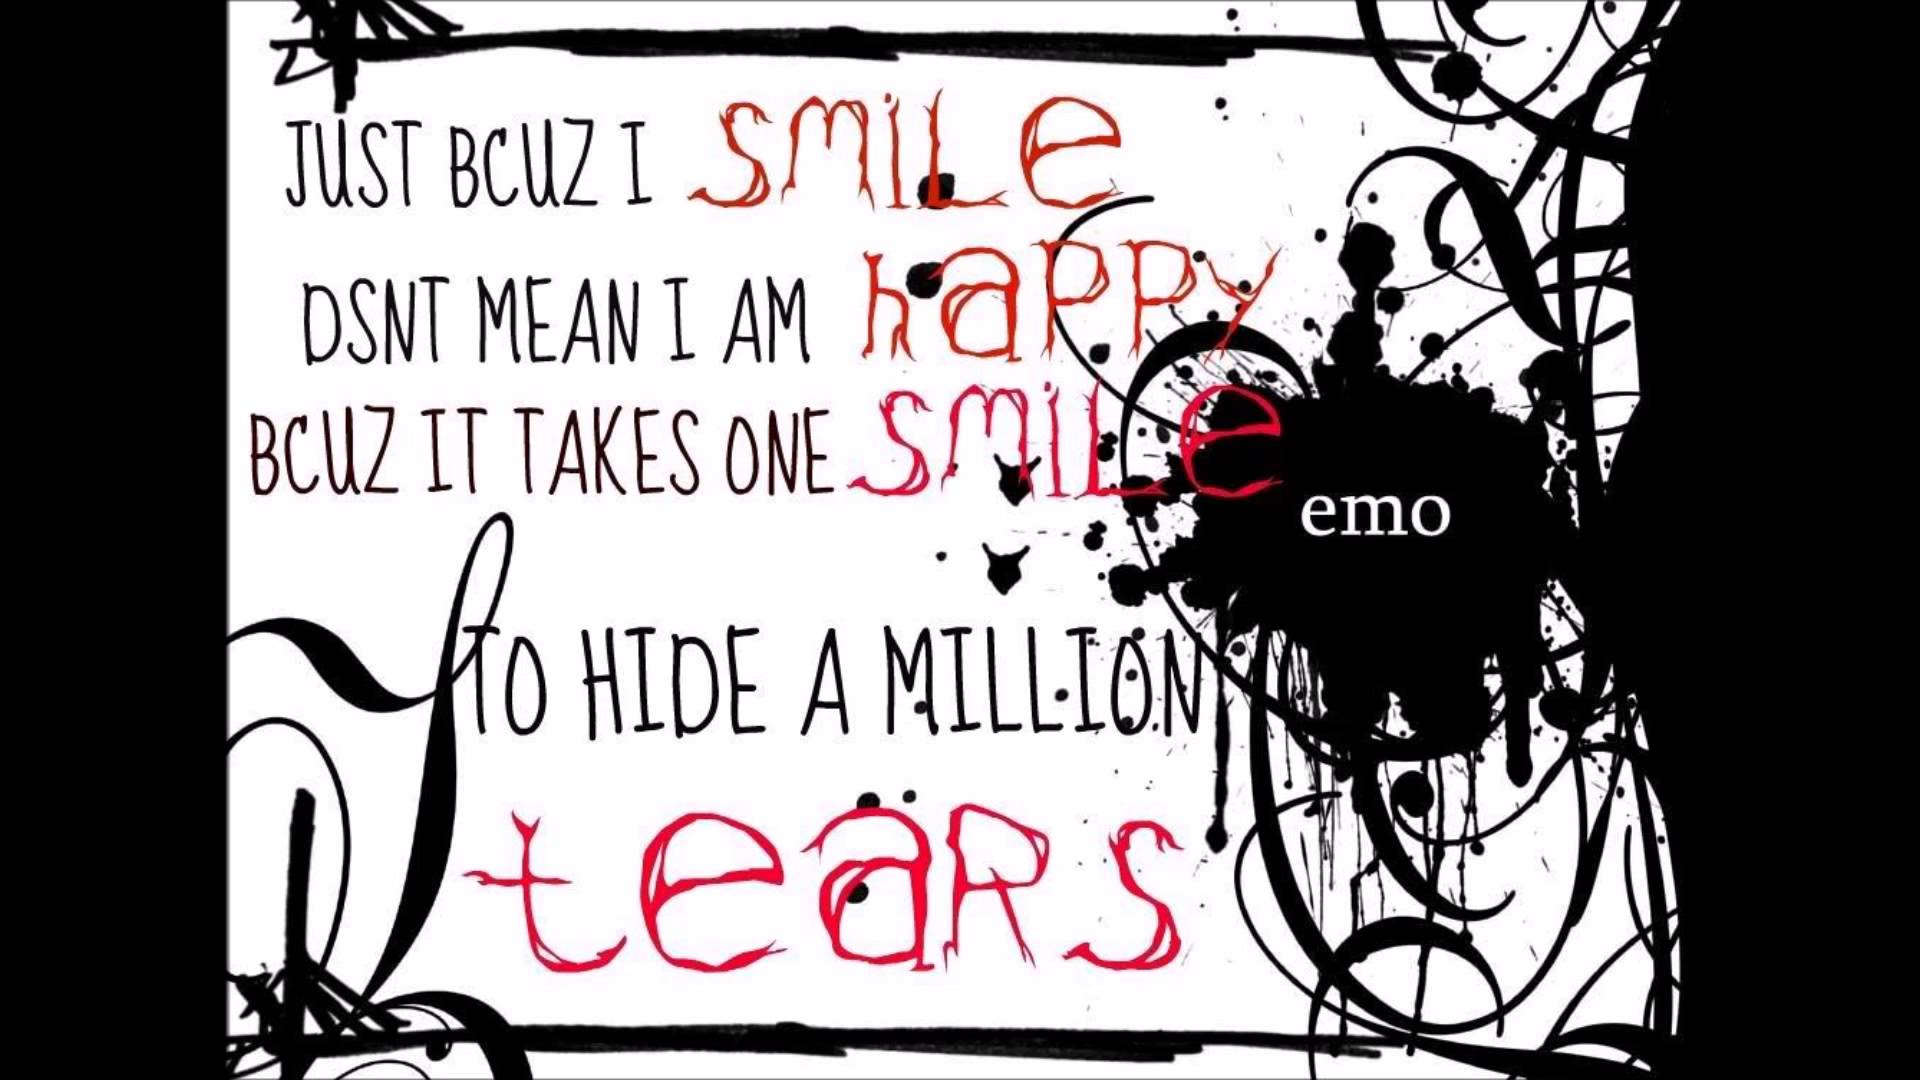 Just 1 Smlle mean 1 Am Hoa it Takes Onesæi emo o - English Quotes Pic Free  Download - 1920x1080 Wallpaper 